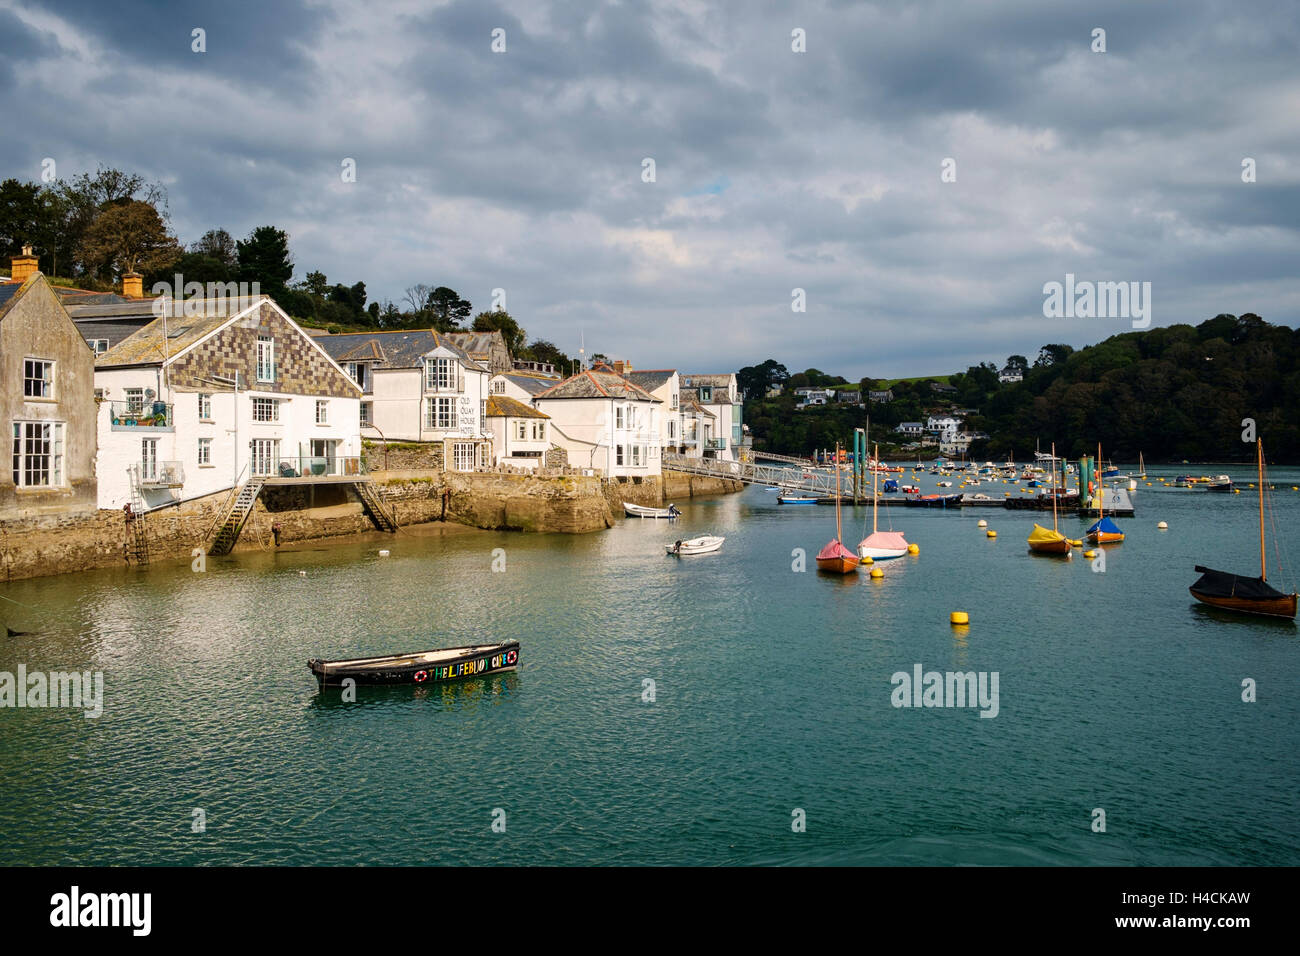 Houses and hotel in Fowey town the River Fowey, Cornwall, England, UK Stock Photo